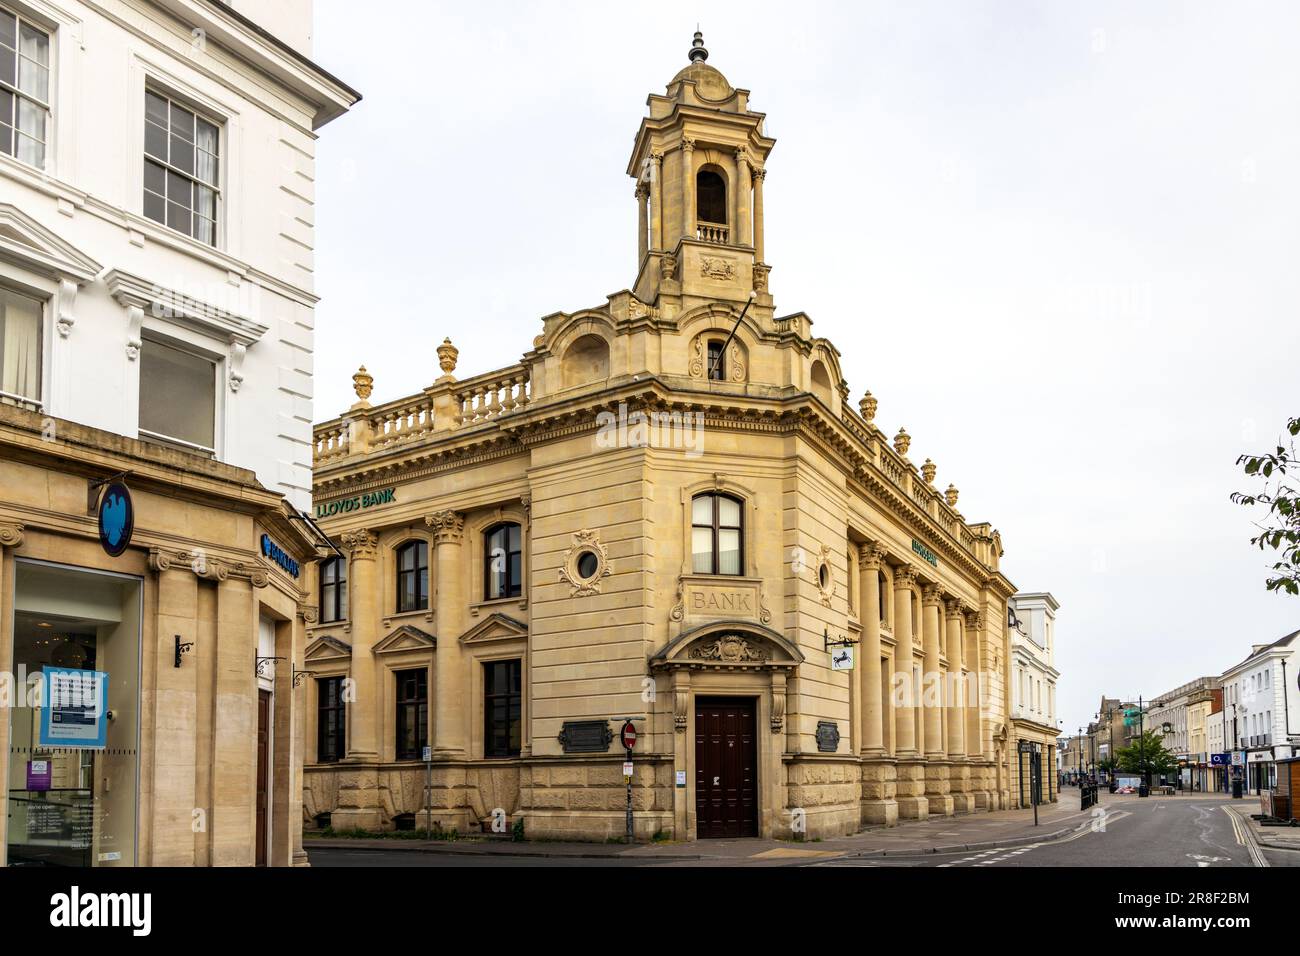 Lloyds Bank building at junction with Rodney Road, Cheltenham town centre, Gloucestershire. Stock Photo